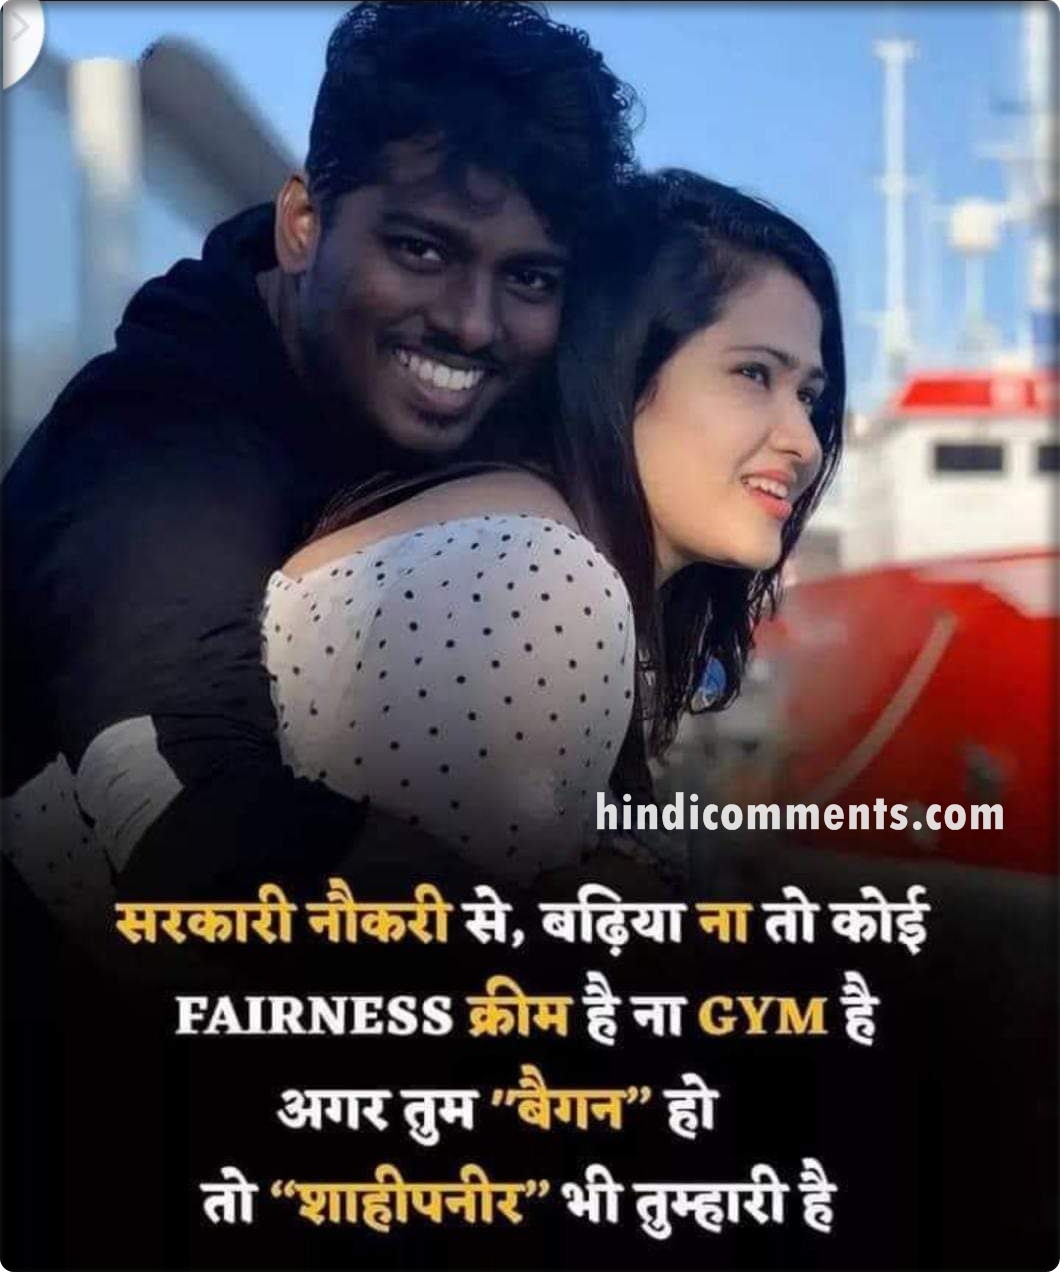 Funny Shayari Images Comments Pictures - Hindi 